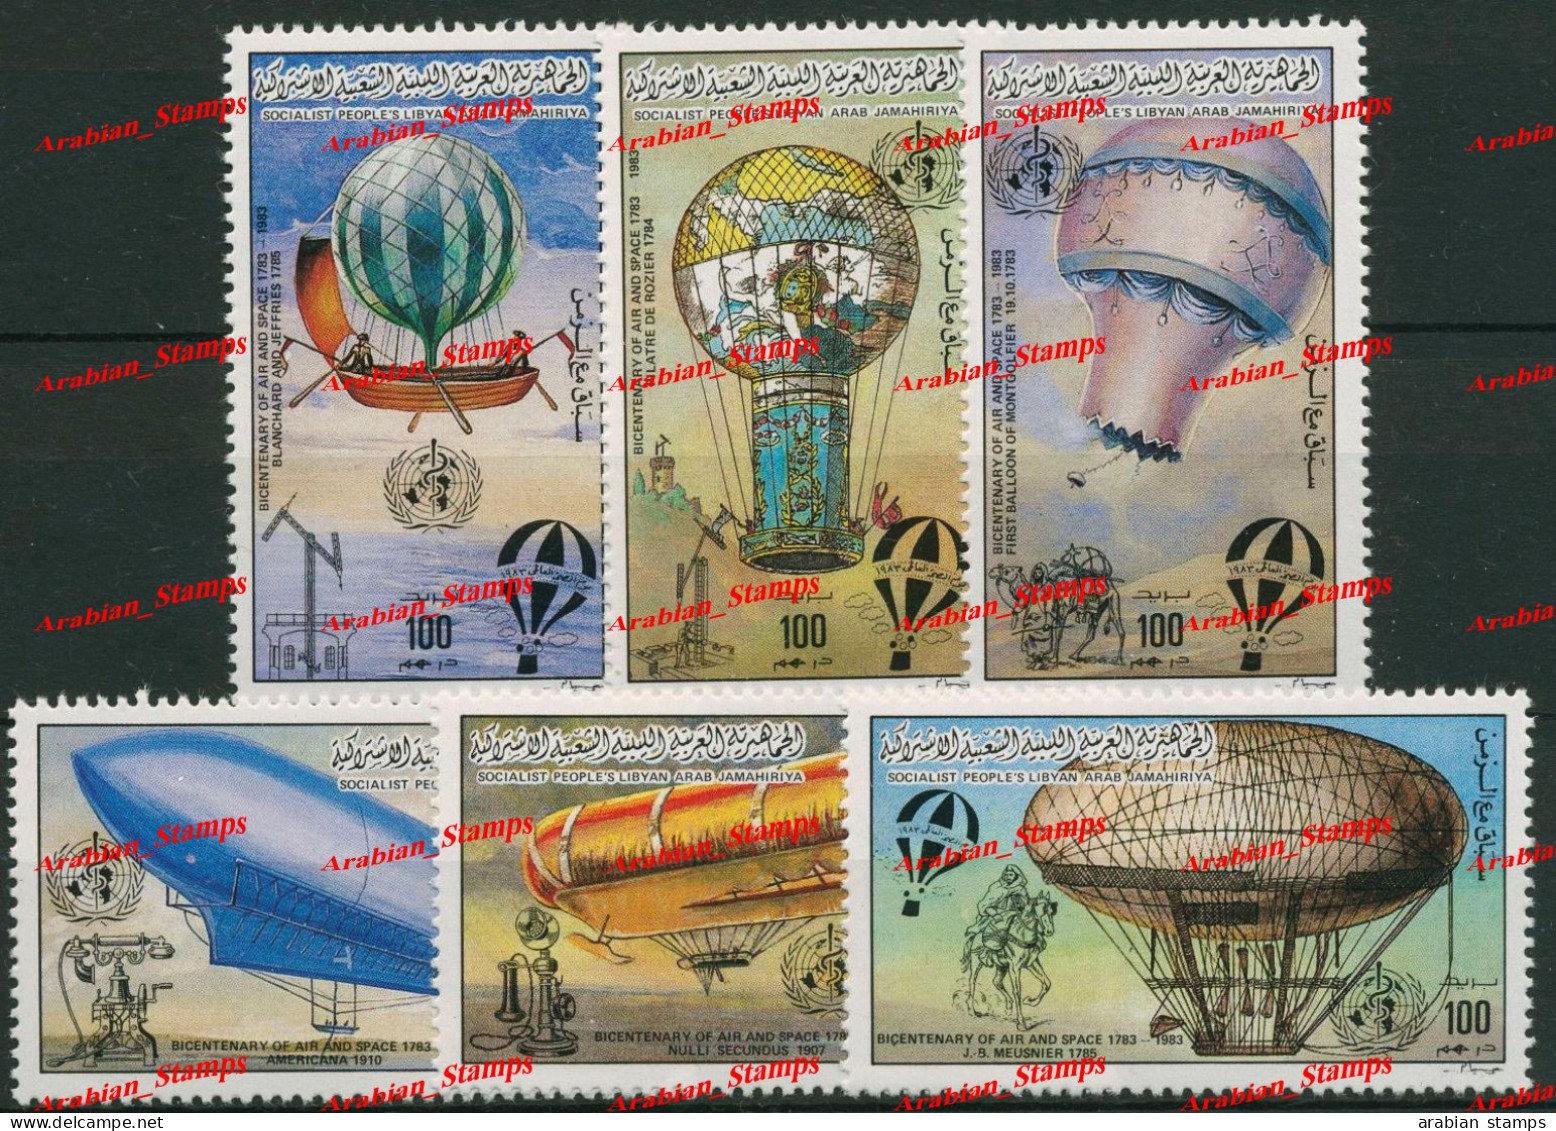 LIBYA 1983 MNH AIR AND SPACE BICENTENARY 1ST MANNED FLIGHT 200TH ZEPPELIN  AIR BALLOON AEROSTAT JOINT ISSUE - Emissions Communes